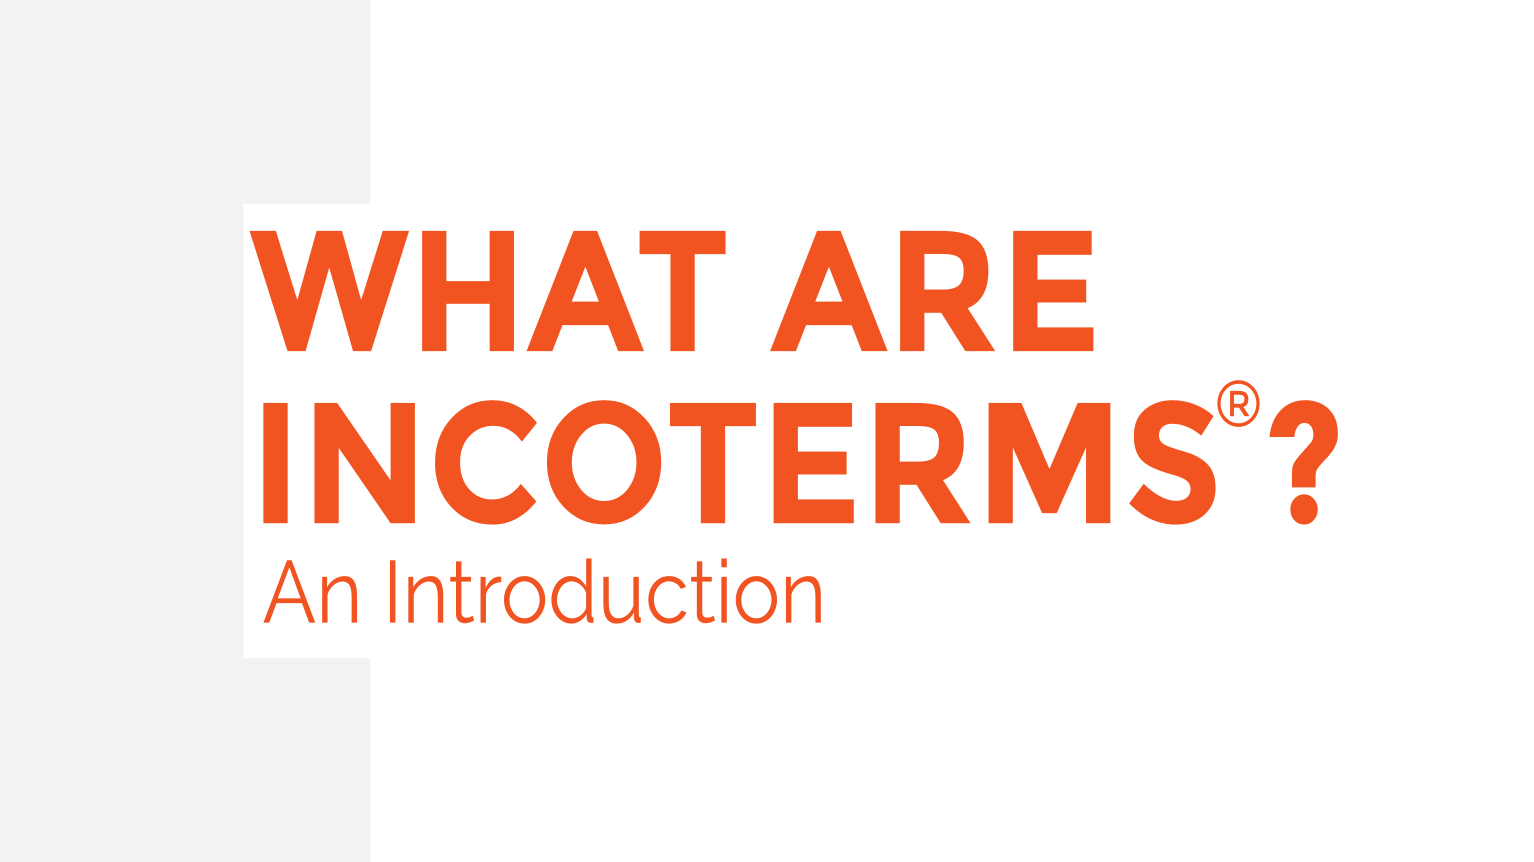 [Video] What Are Incoterms Rules?